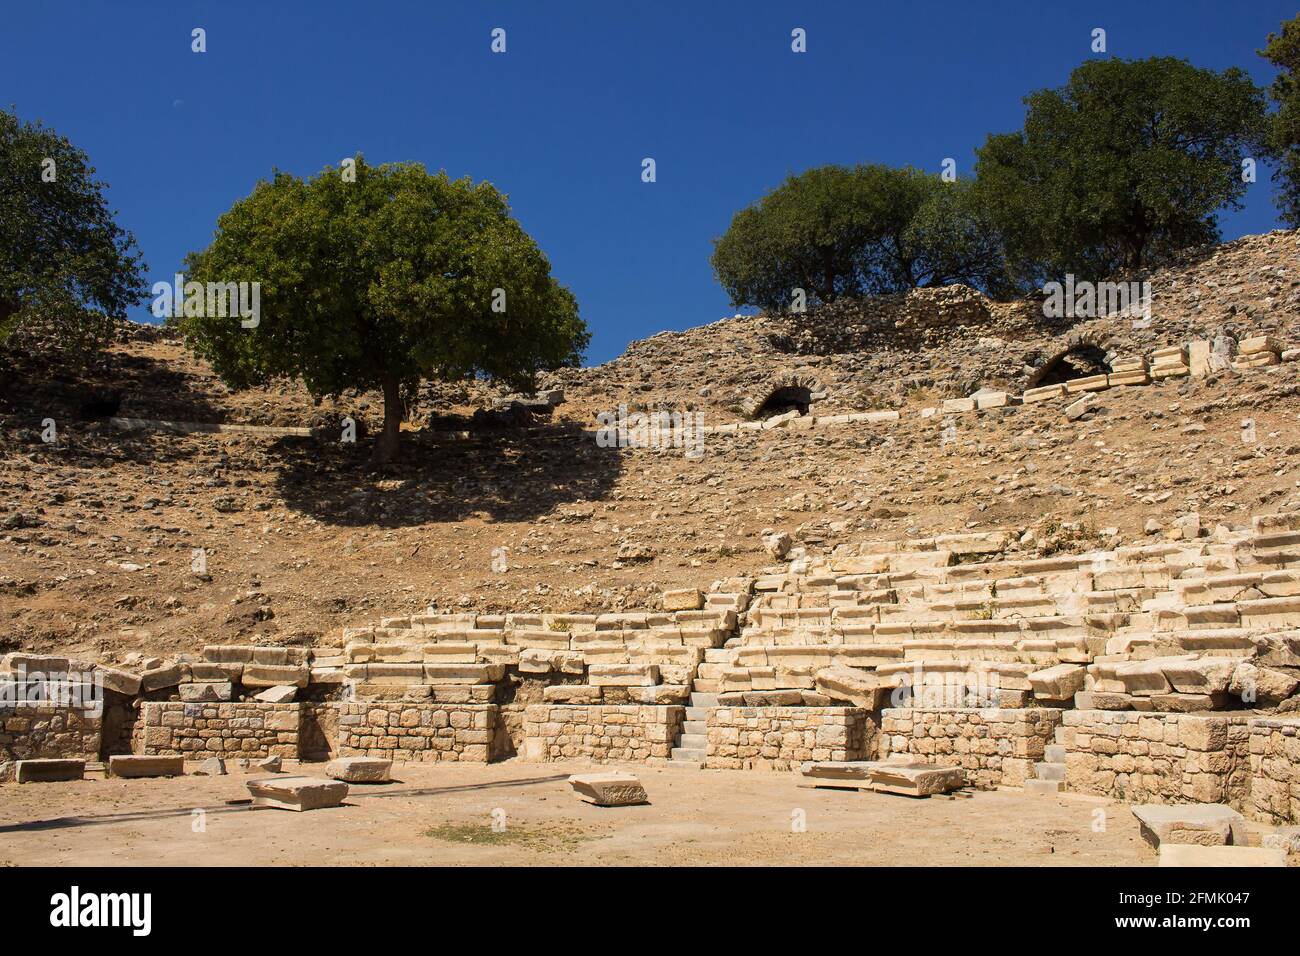 Footage of historical ruins and olive trees at ancient Greek city called Teos on the coast of Ionia located in Sigacik / Seferihisar district of Izmir Stock Photo